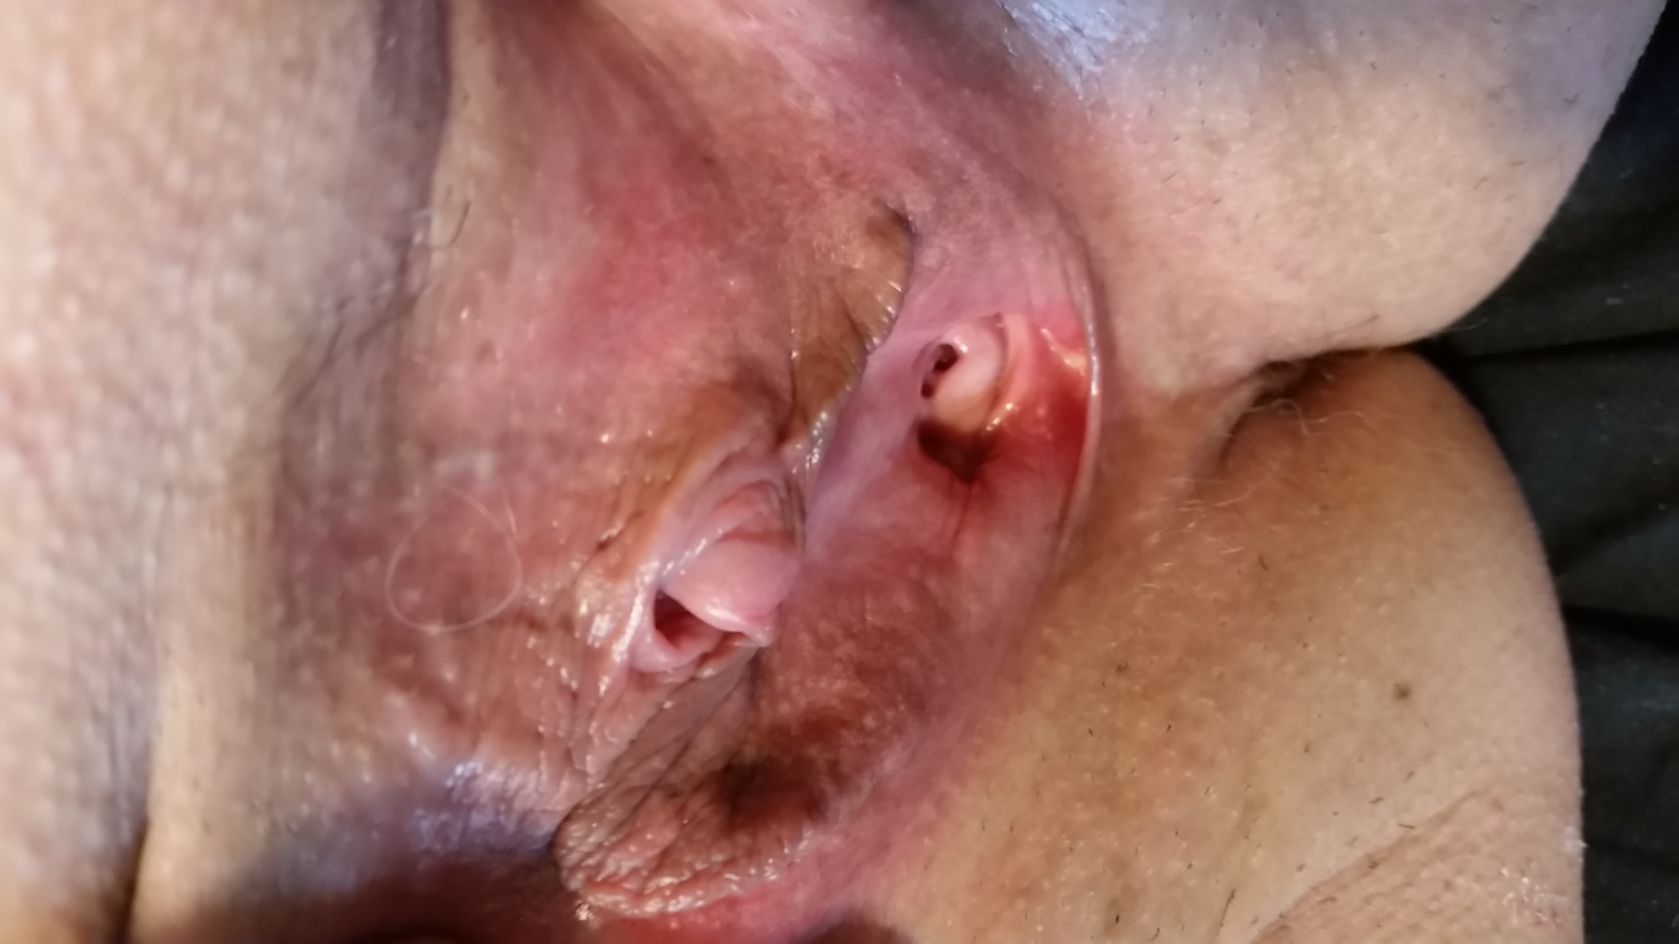 Laurie UP CLOSE CLIT and PEE HOLE